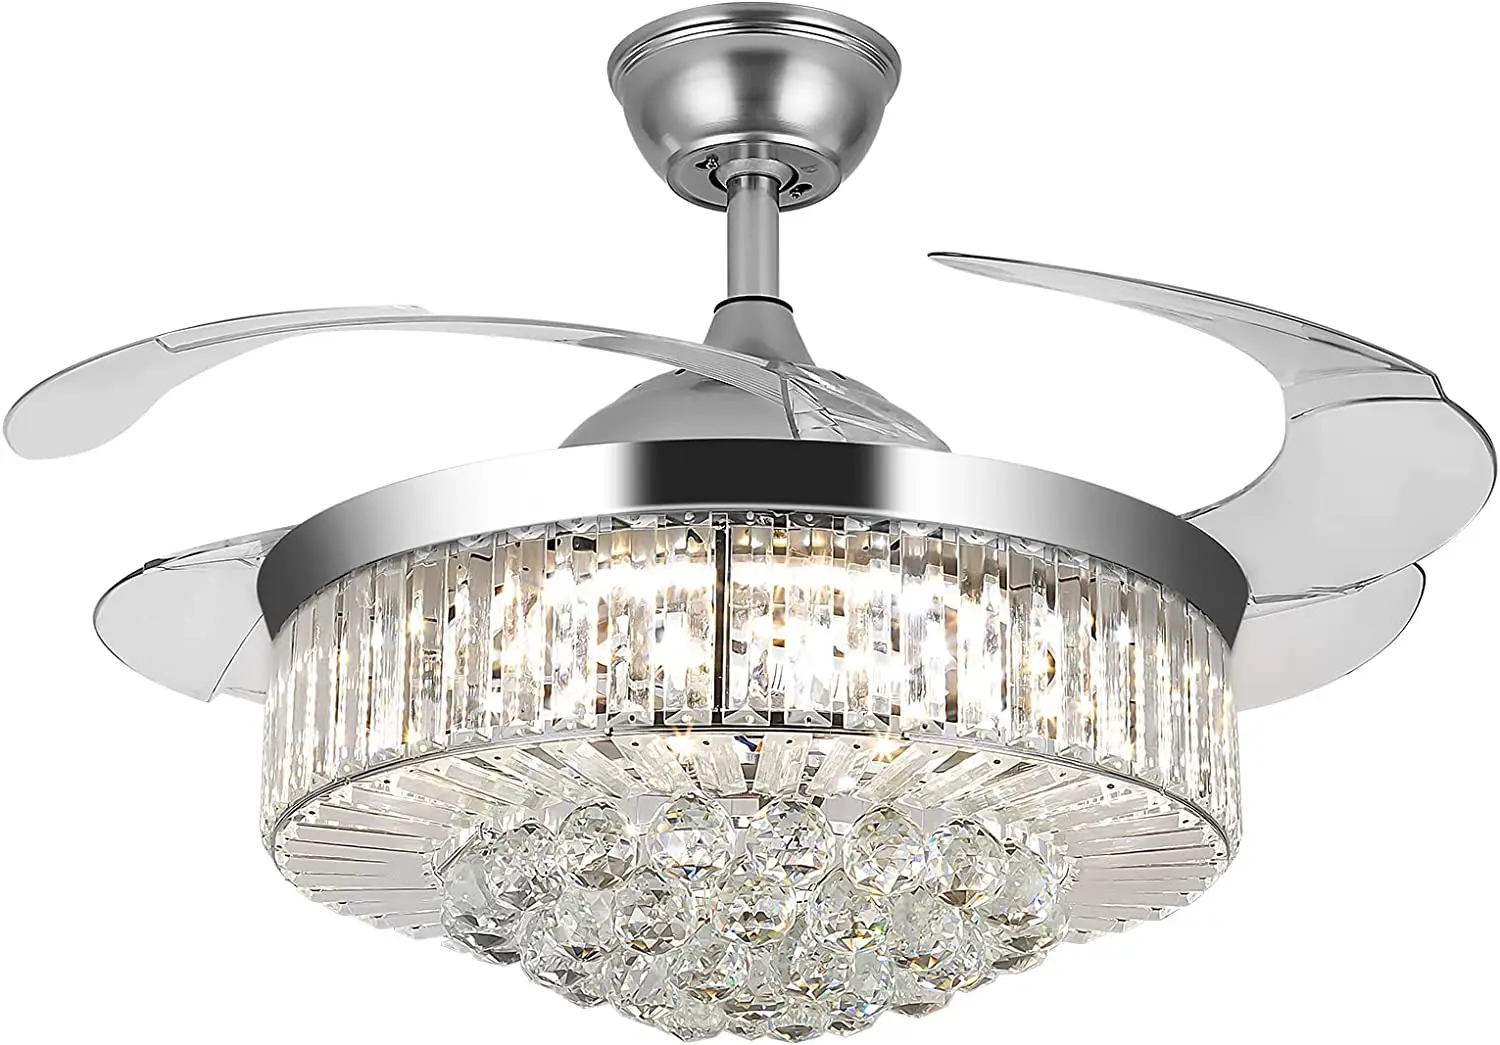 

42"Invisible Ceiling Fan Chandelier Light,Modern Crystal Ceiling Fan Light Remote Control 4 Retractable ABS Blades For Bedroom